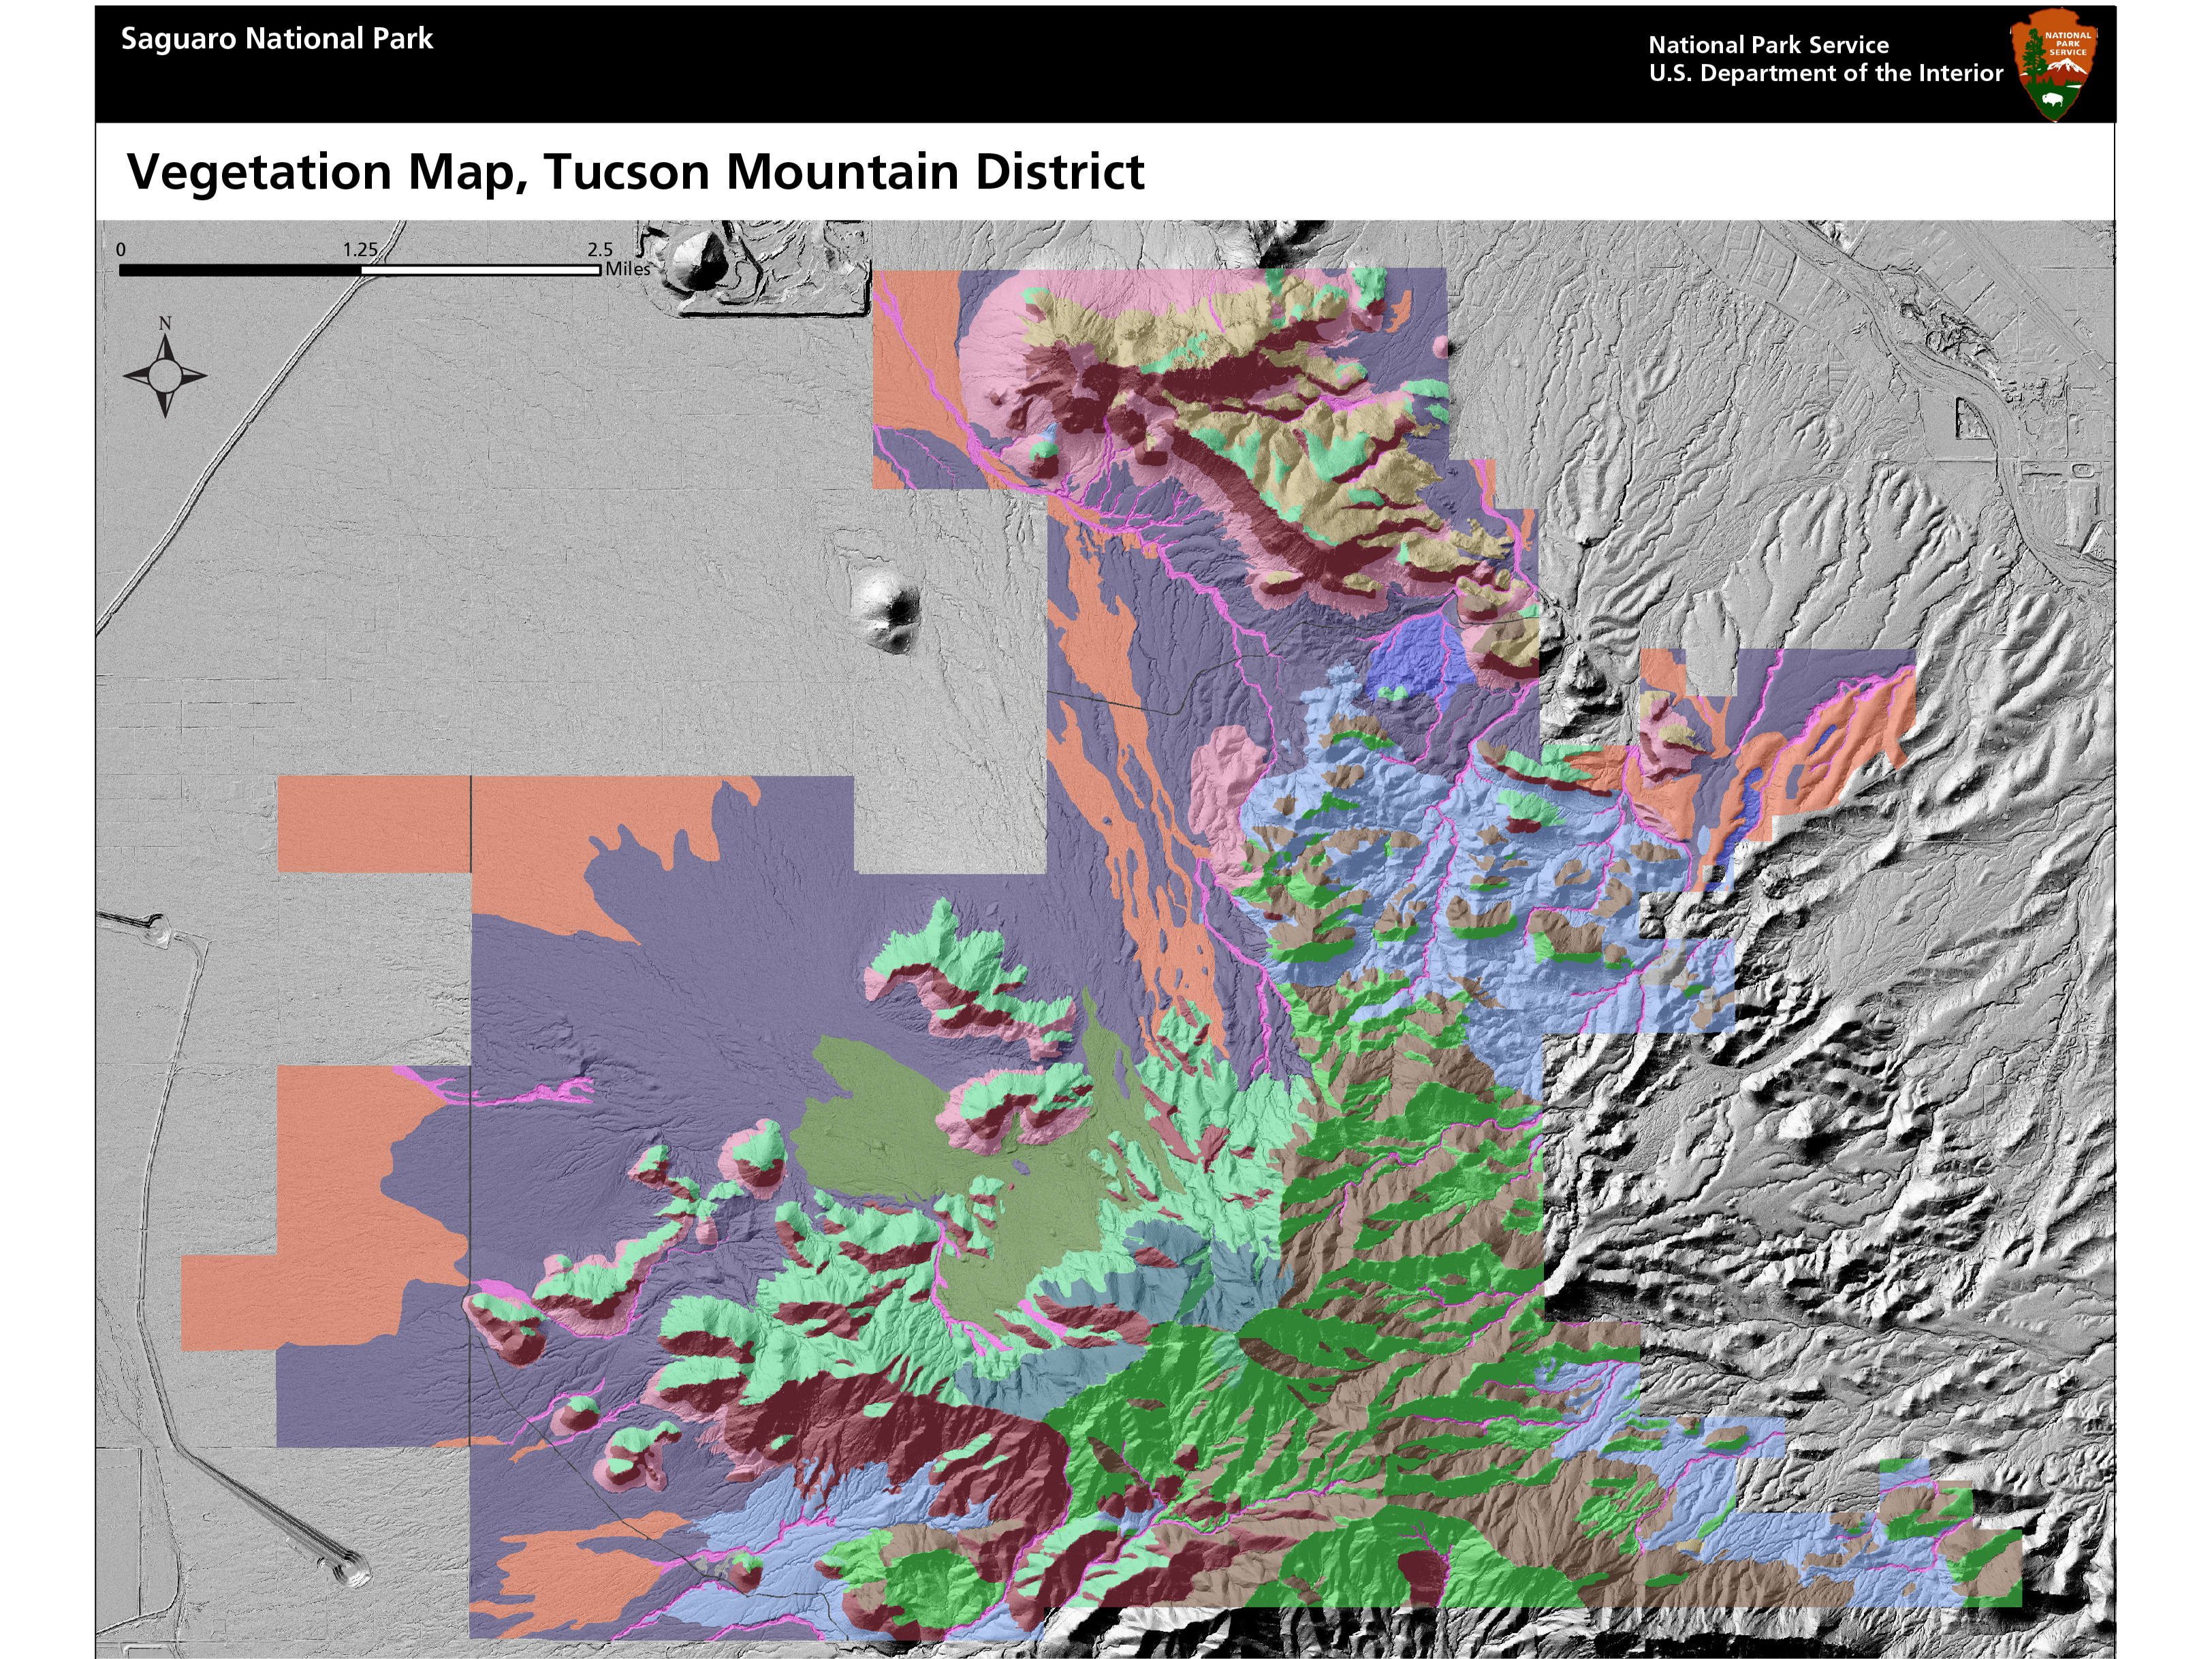 Map of Saguaro National Park's Tucson Mountain District with different colors showing locations of different plant communities.